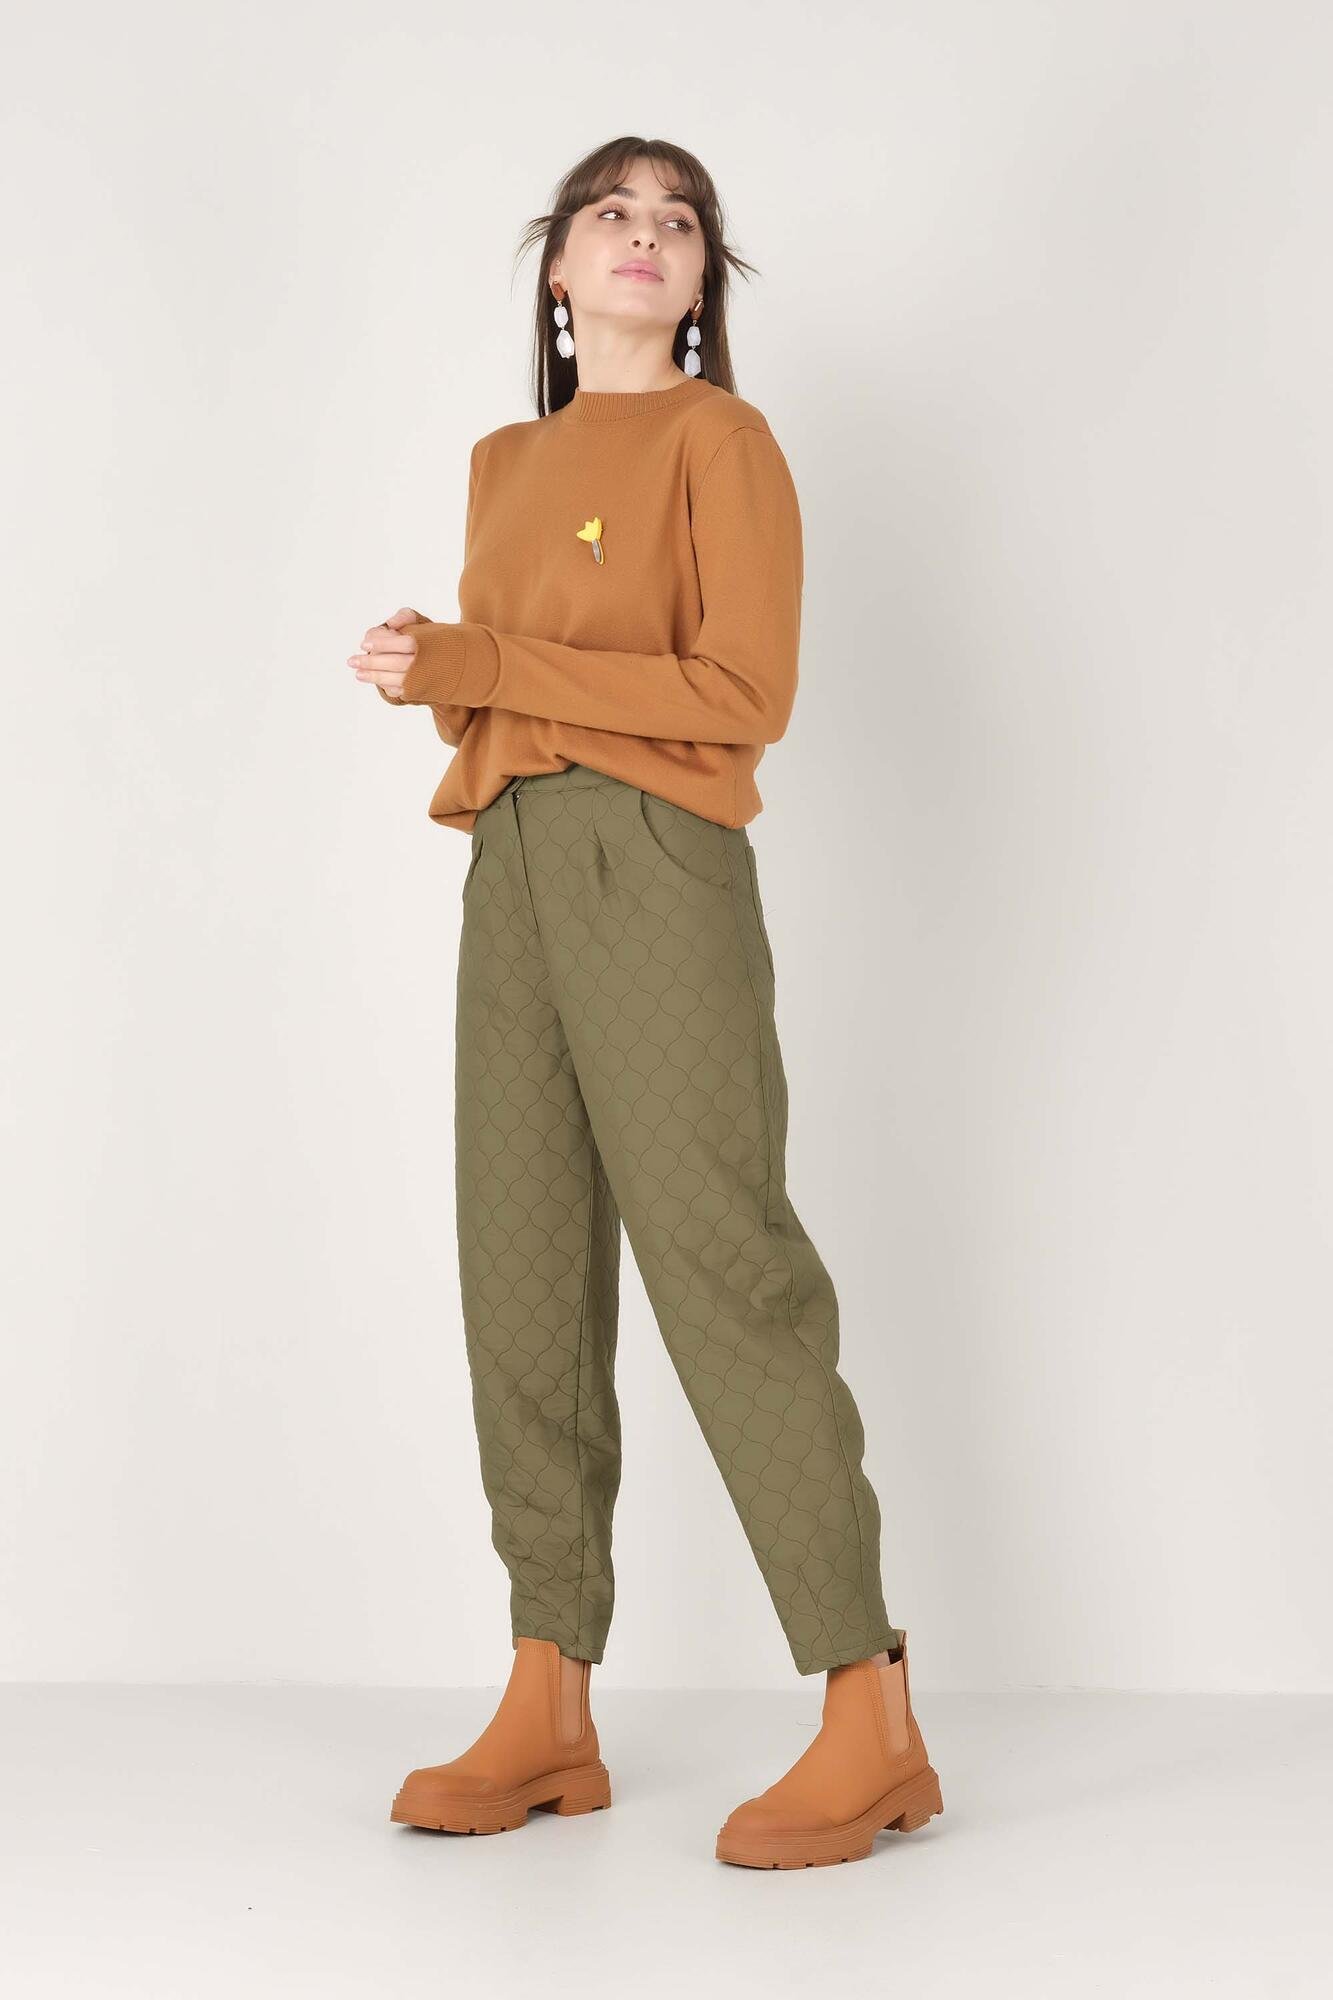 Quilted Khaki Pants